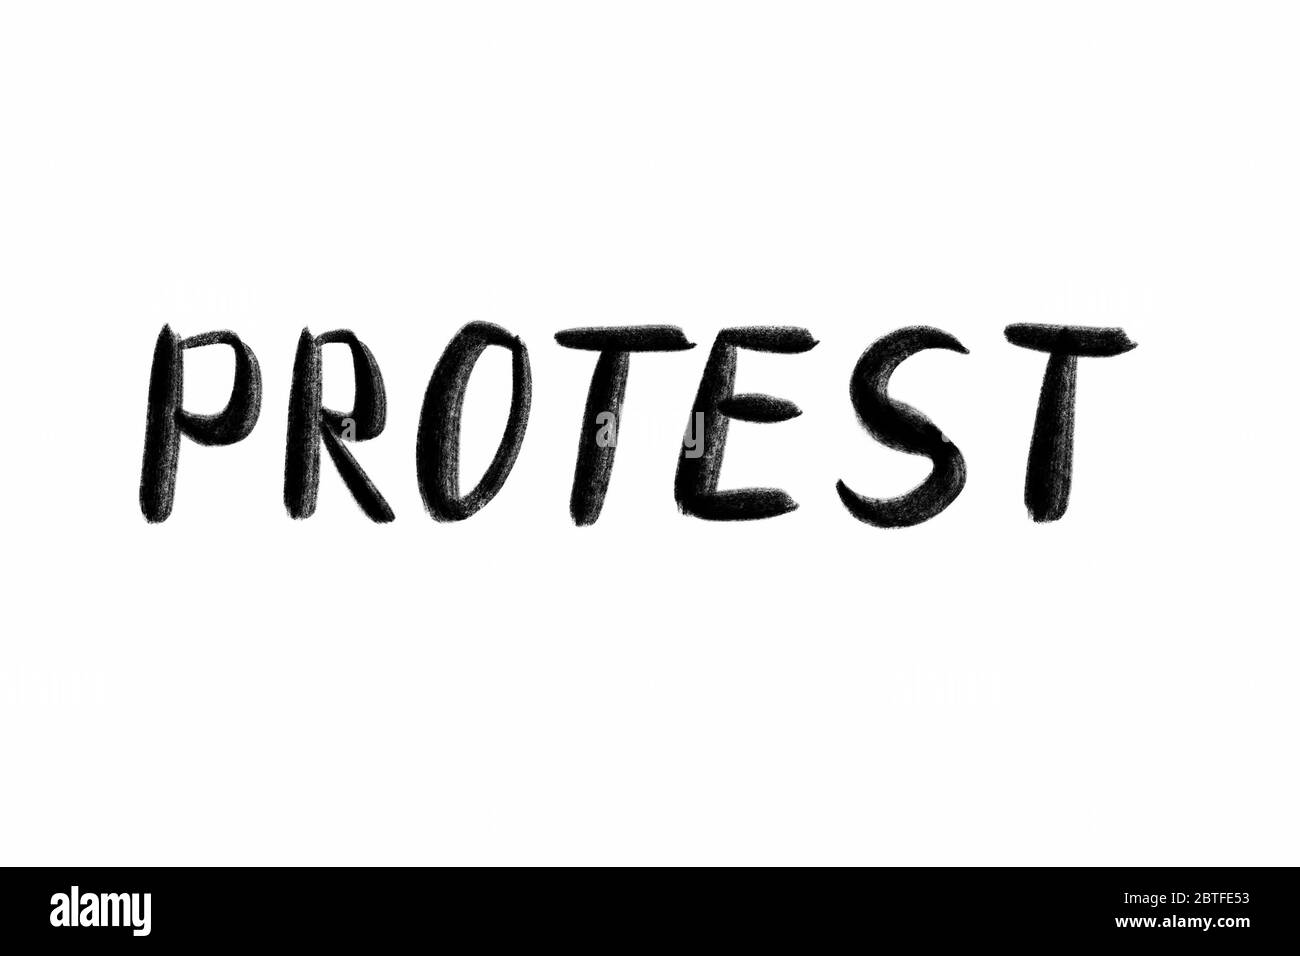 PROTEST Hand written text - lettering isolated on white. Coronovirus COVID 19 concept Stock Photo